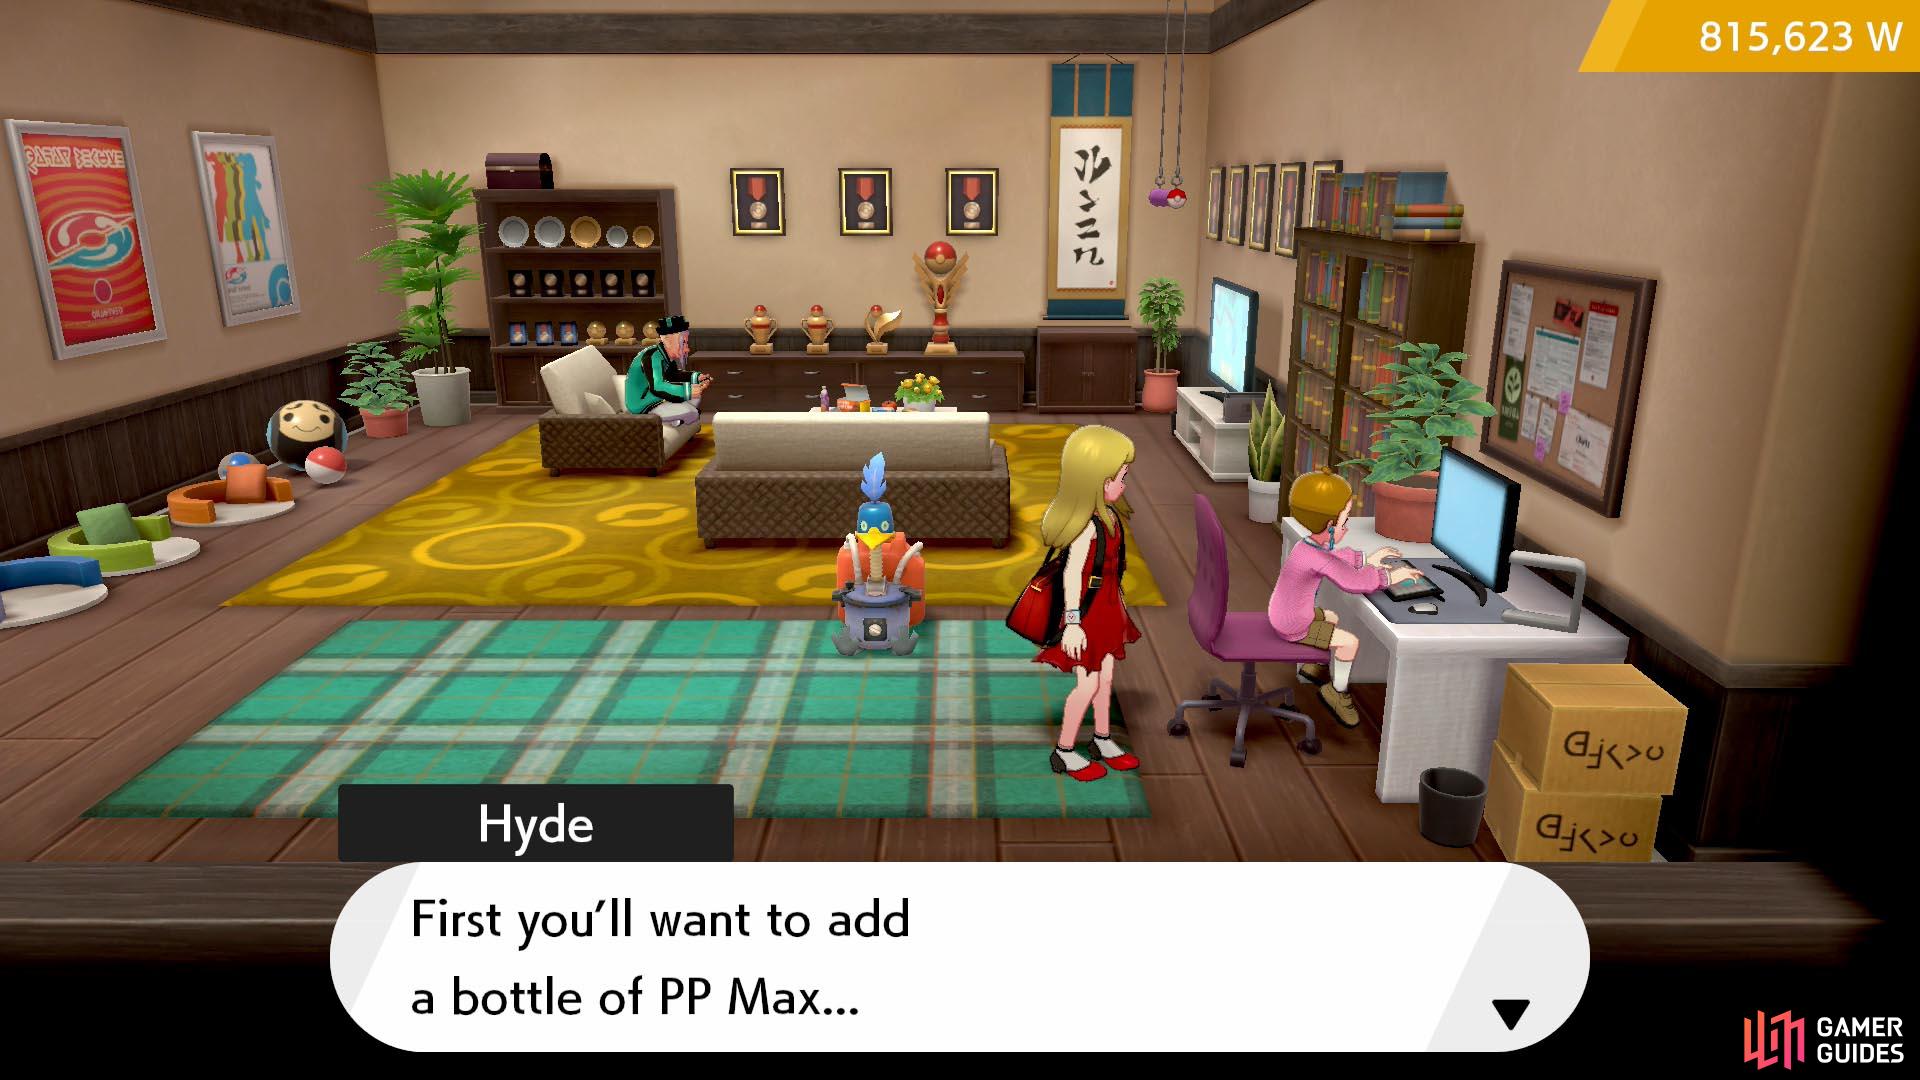 No, don't use any PP Maxes; they're too valuable. Use a Rare Candy or Bottle Cap if you must.